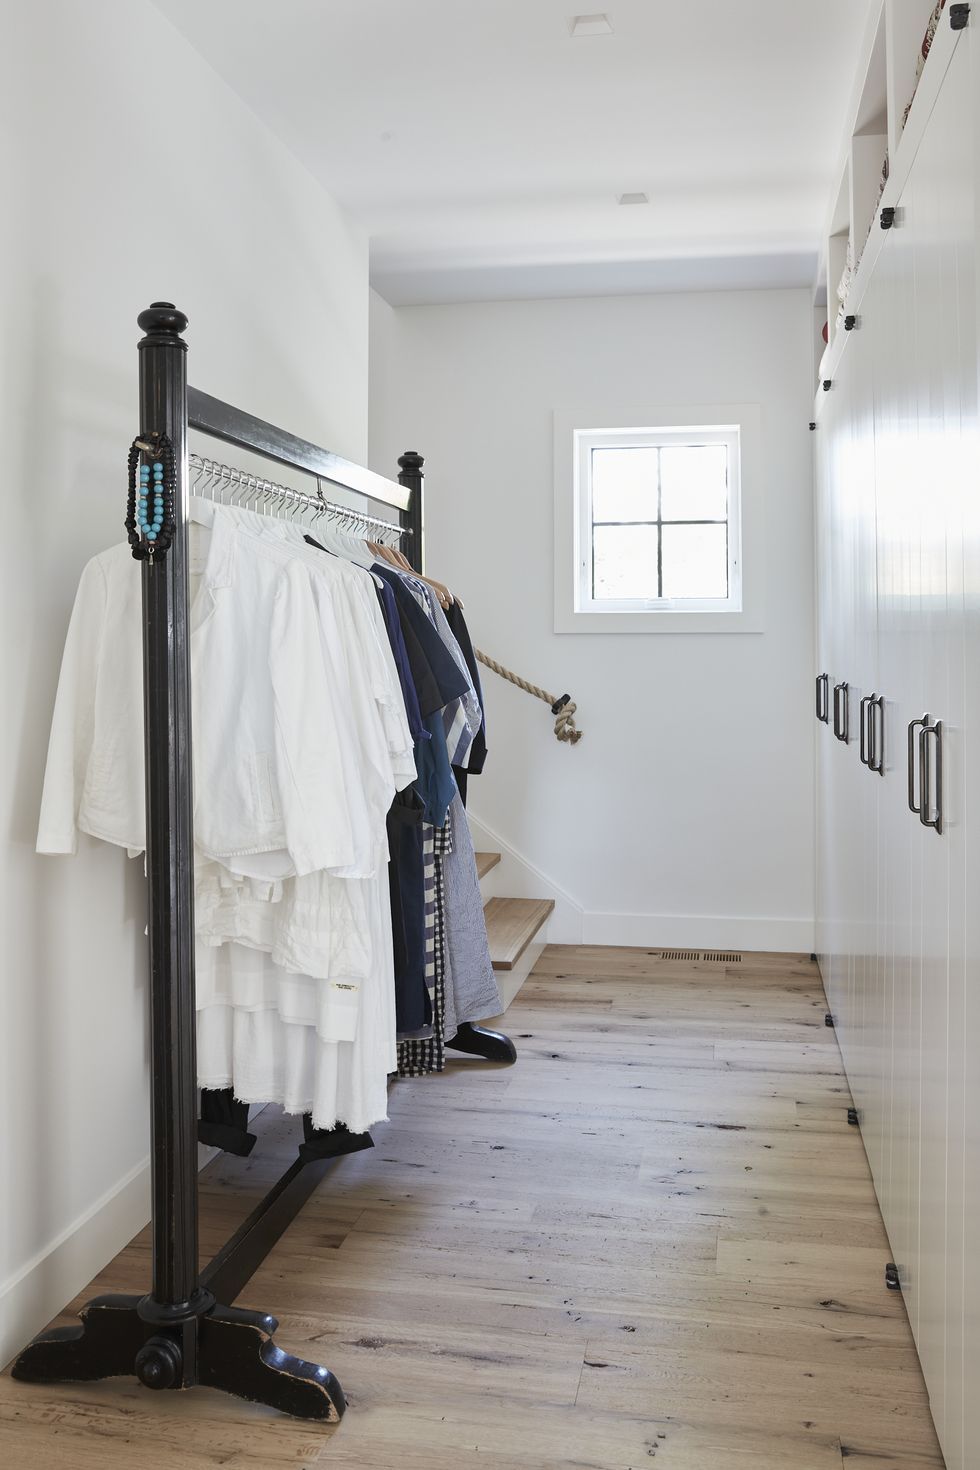 Two People, One Tiny Closet - A Small Space Storage Agony with 5 Problems &  5 Clever Solutions - Emily Henderson